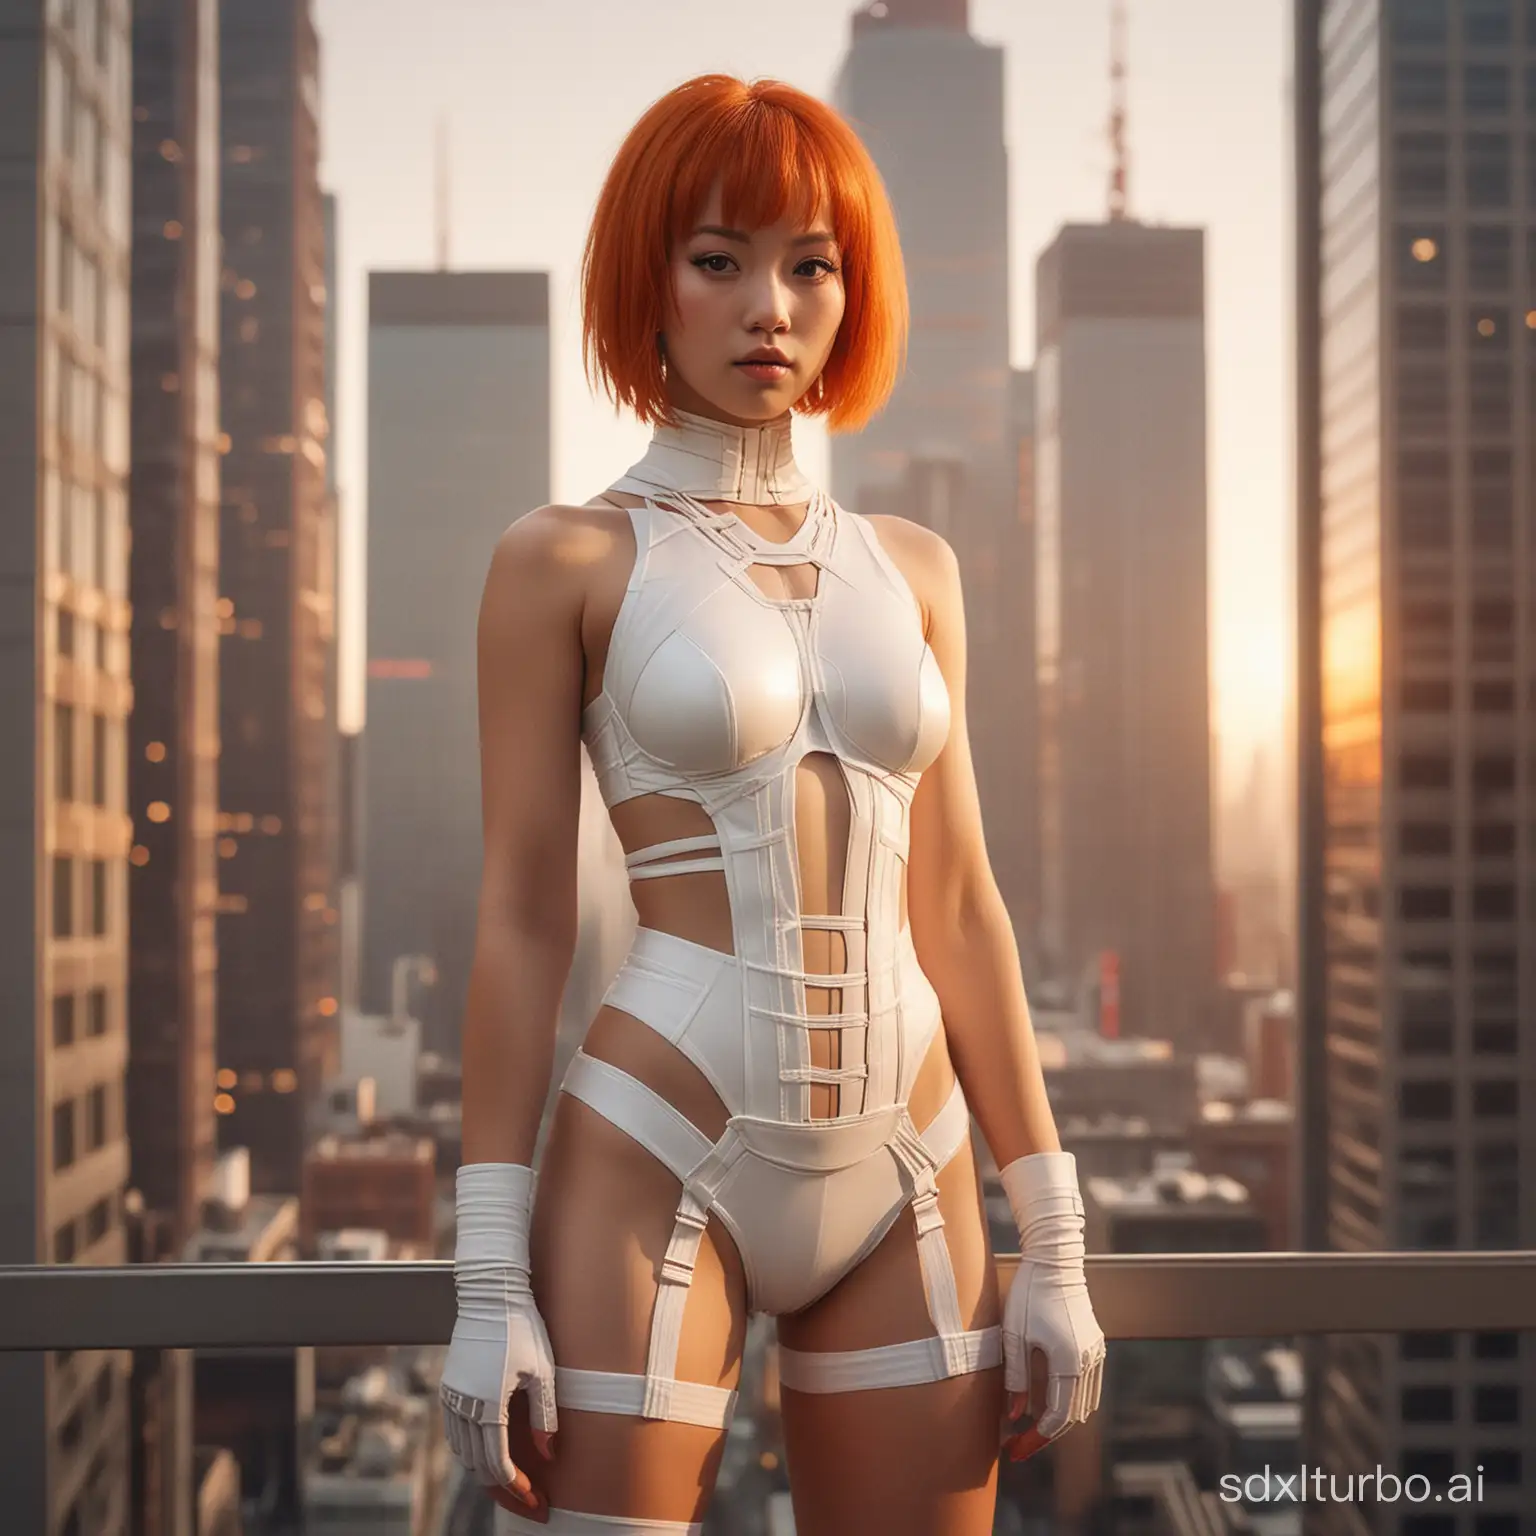 Futuristic-Japanese-Teen-in-Leeloo-Bandage-Costume-with-Copper-Orange-Bob-Hair-in-Cityscape